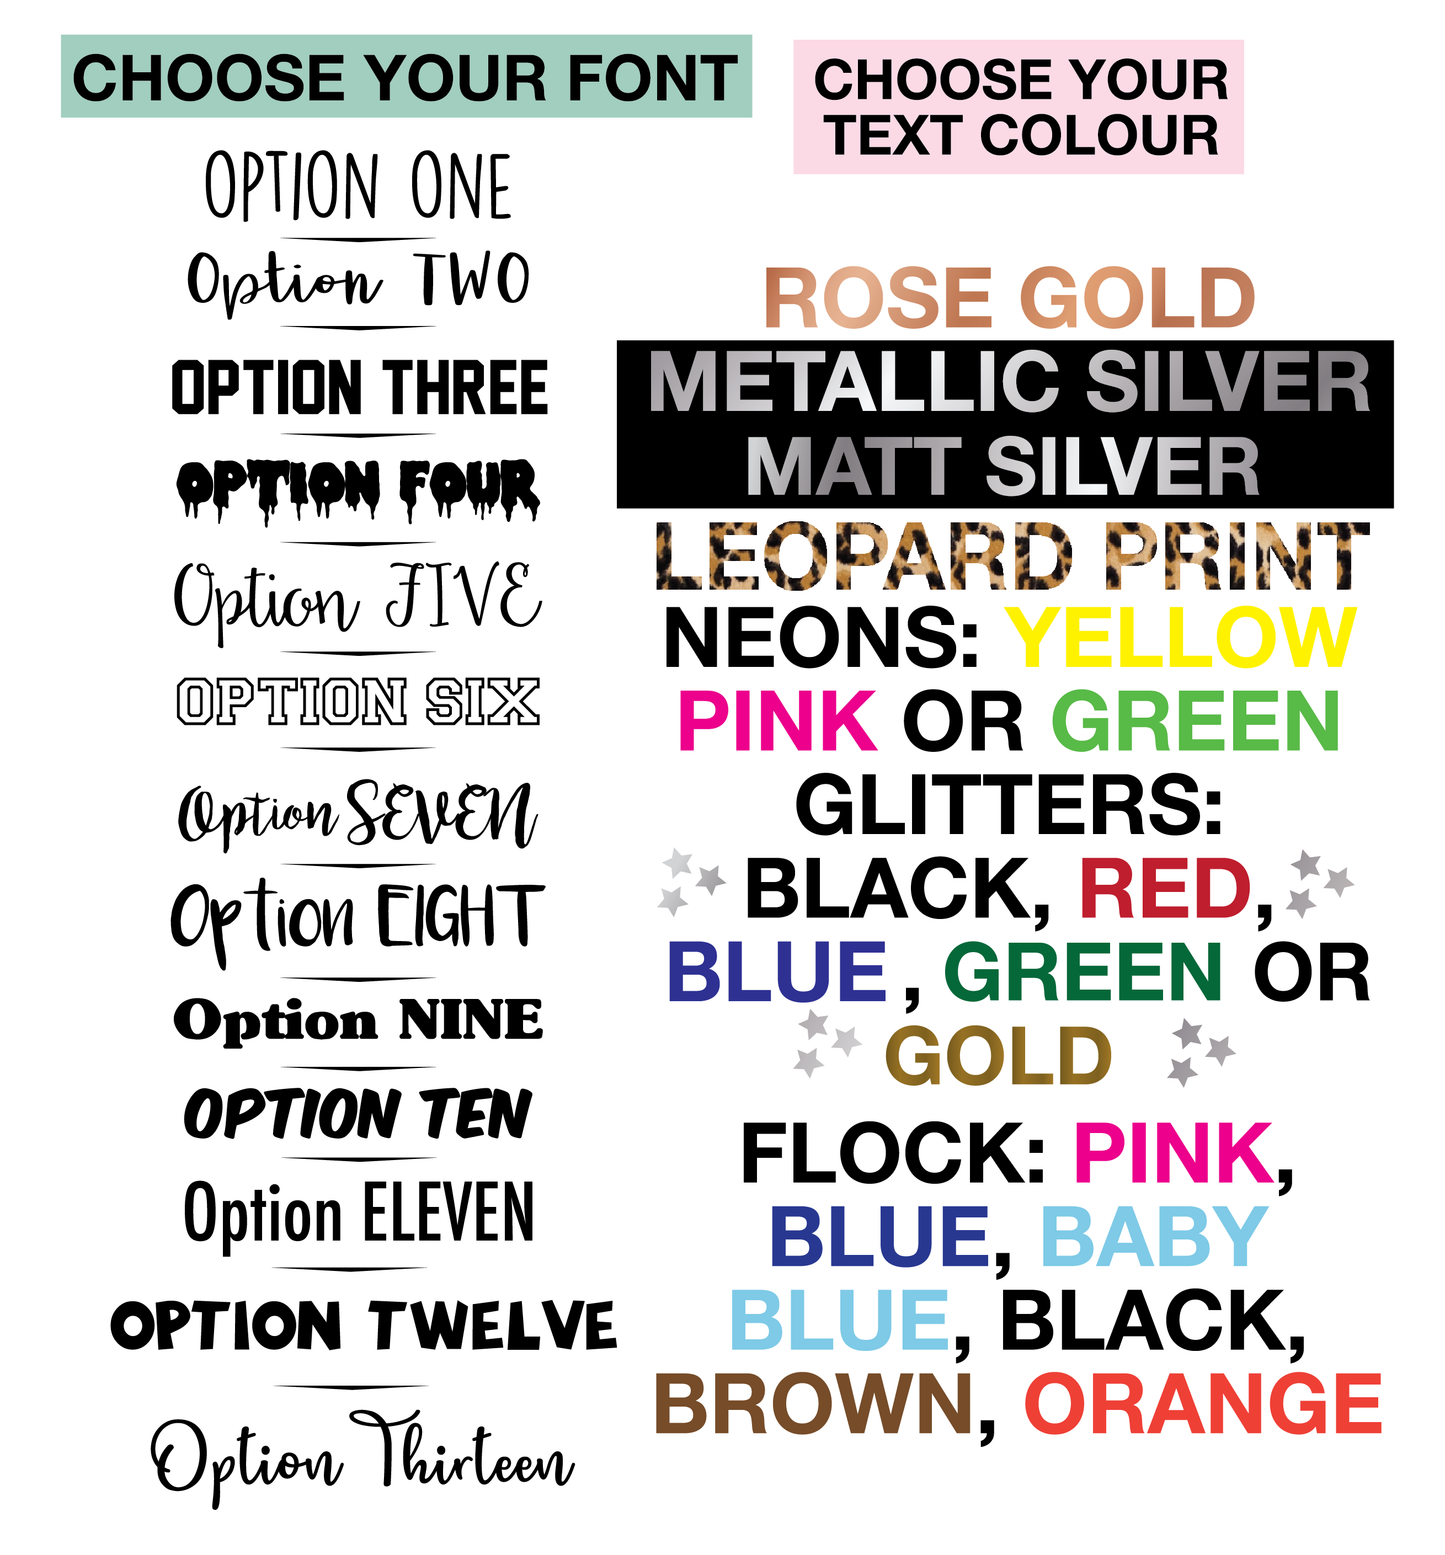 Premium custom order any text colour and font | Adult's unisex Tshirt